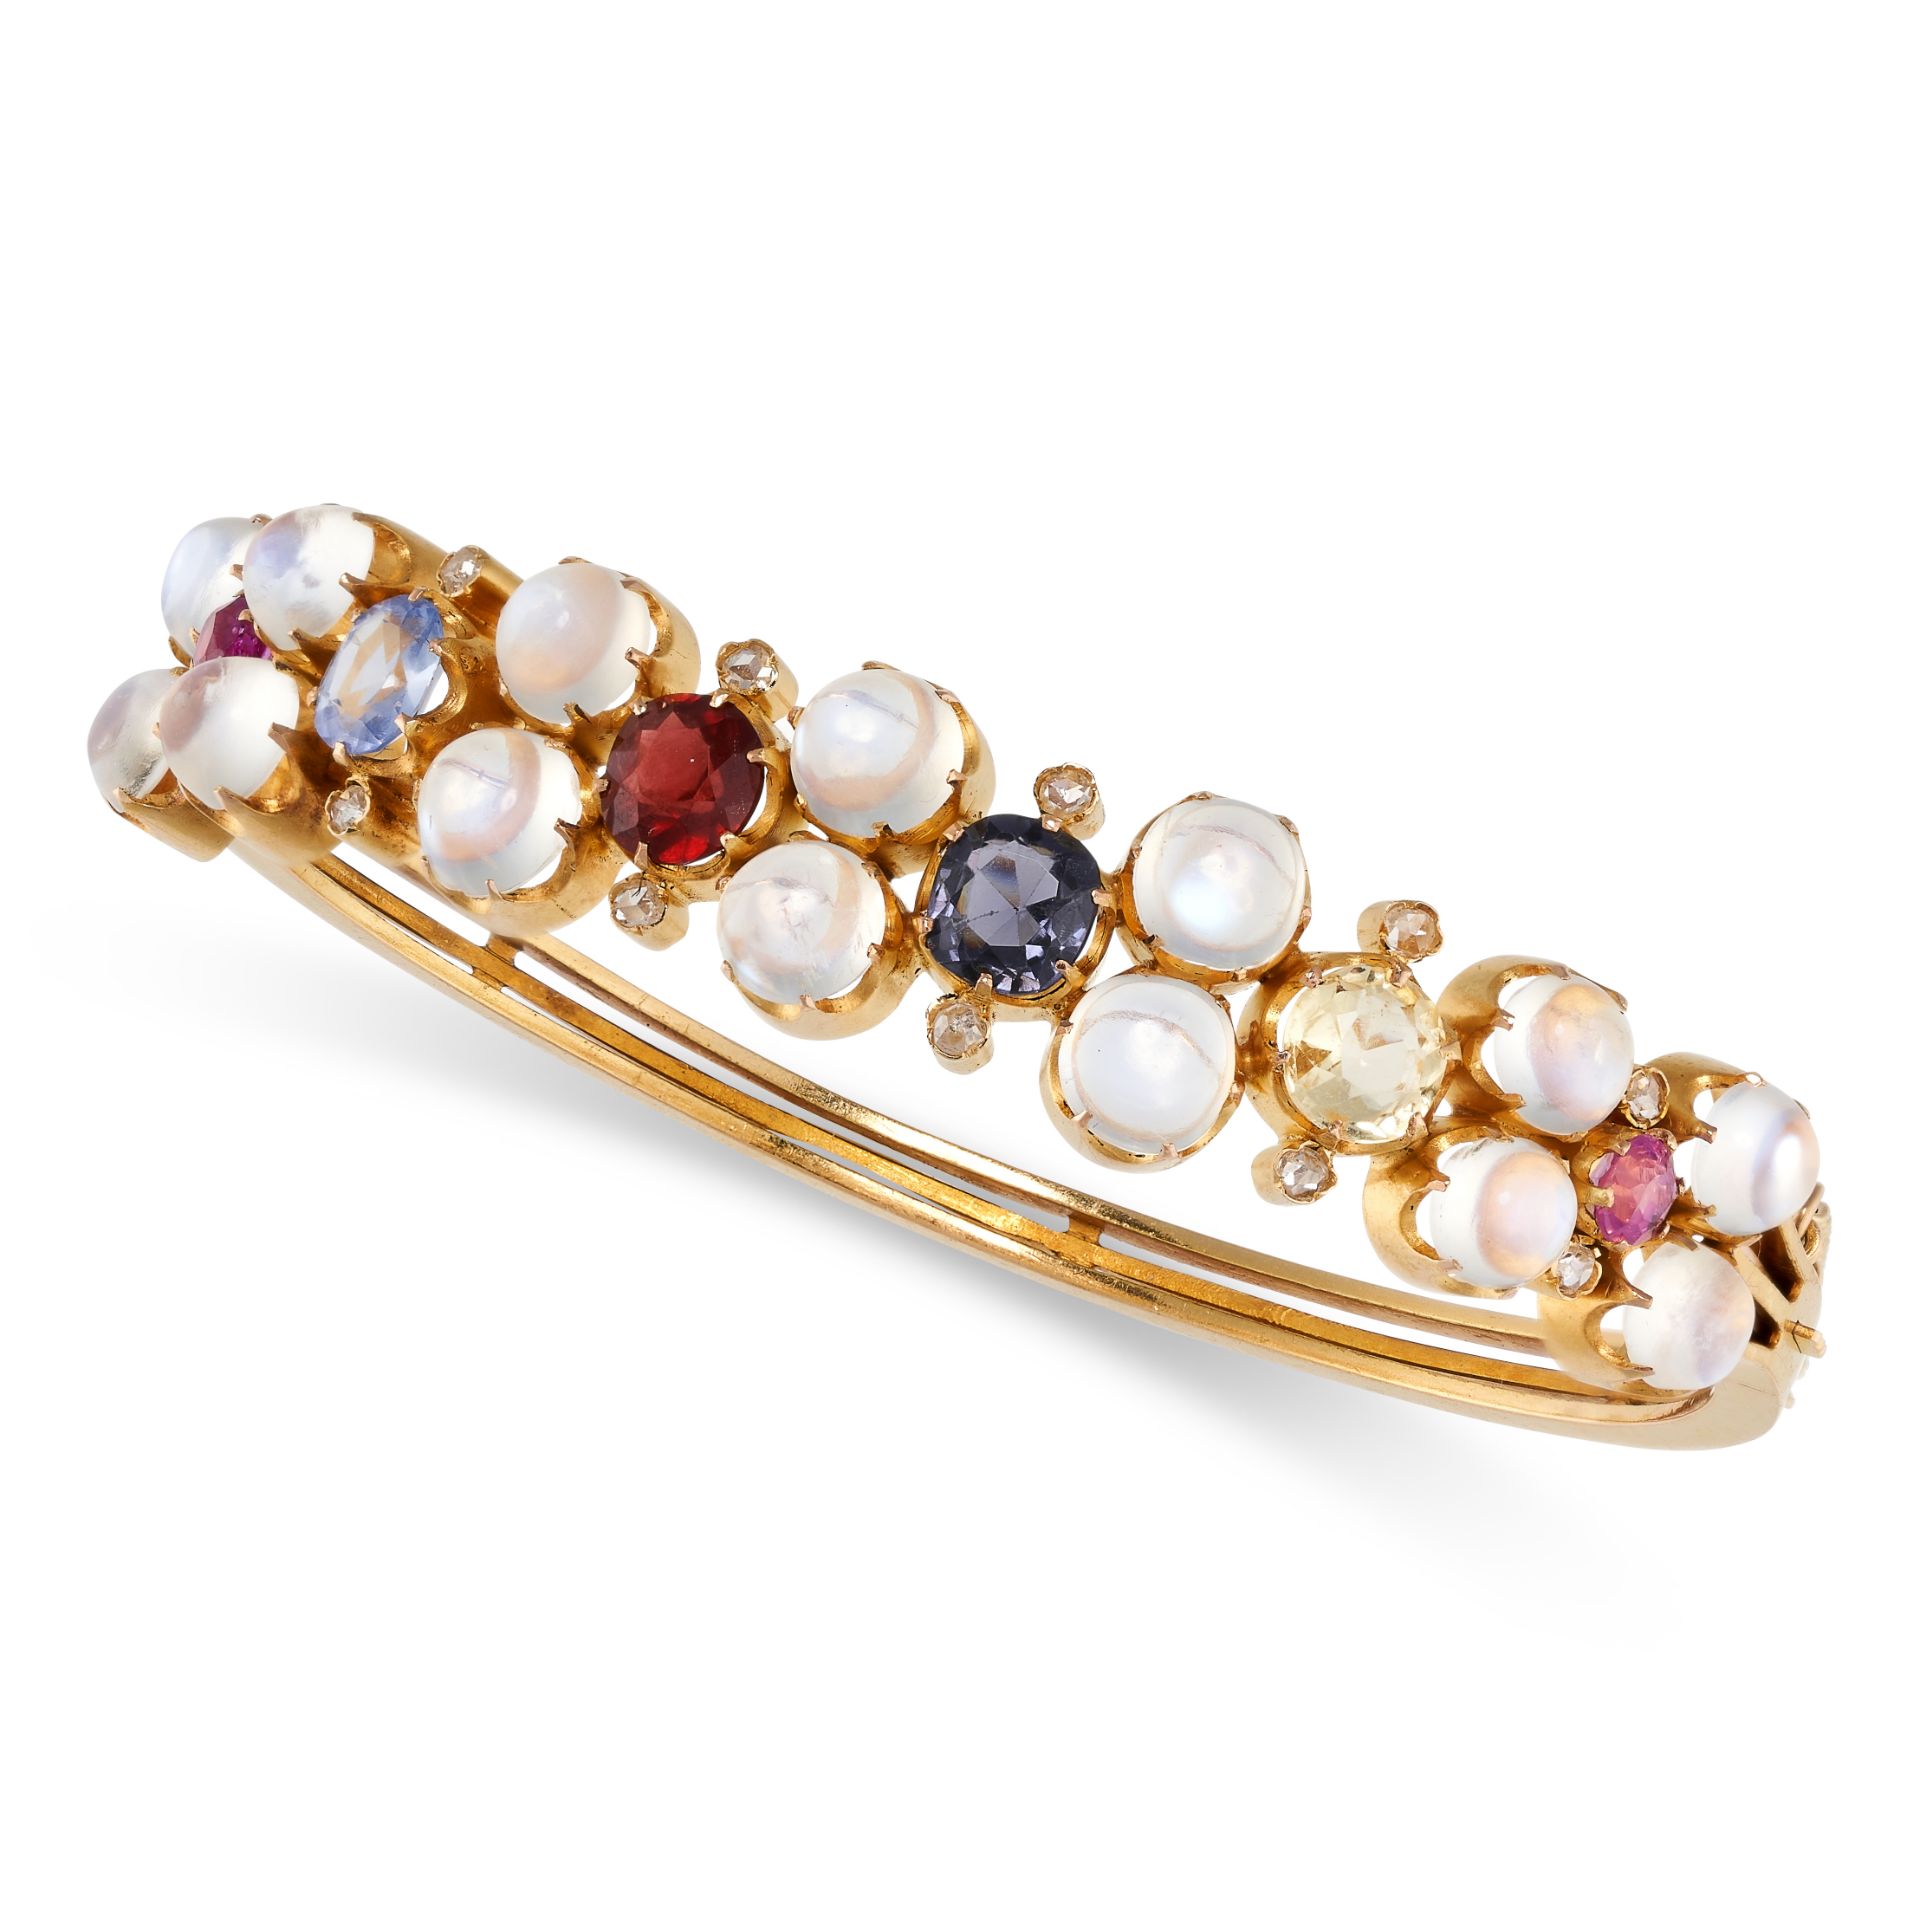 A MOONSTONE, SAPPHIRE AND DIAMOND BANGLE in yellow gold, the hinged body set with round cabochon